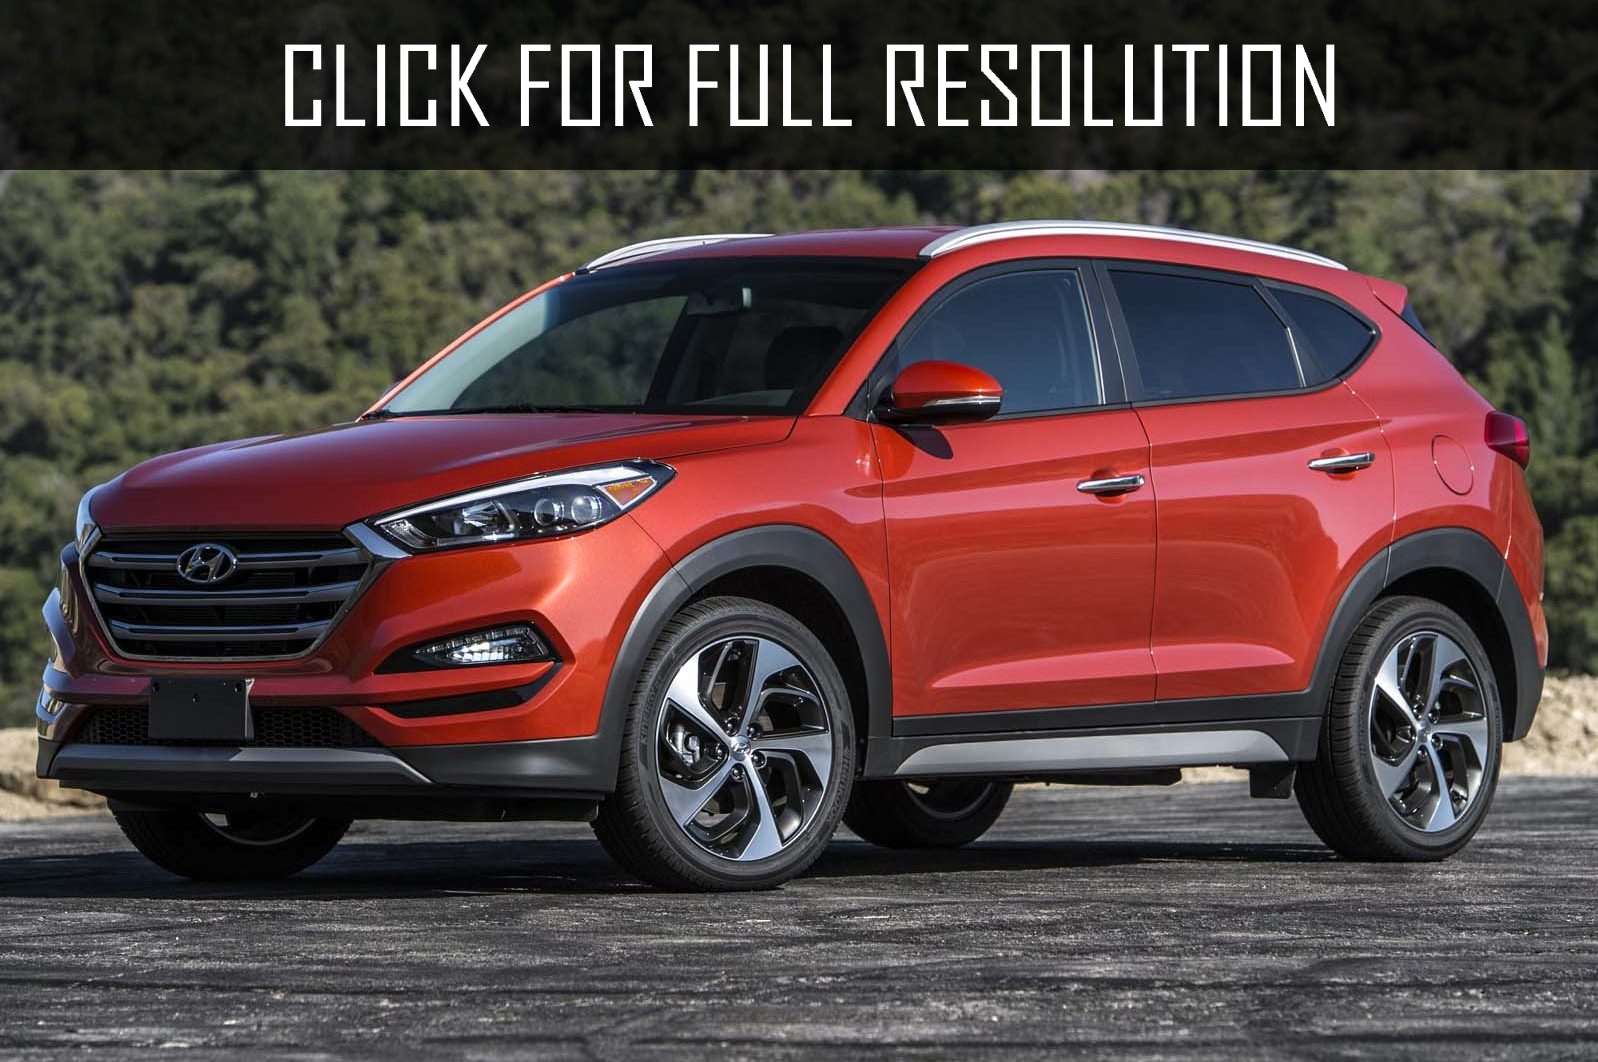 Kia Tucson amazing photo gallery, some information and specifications